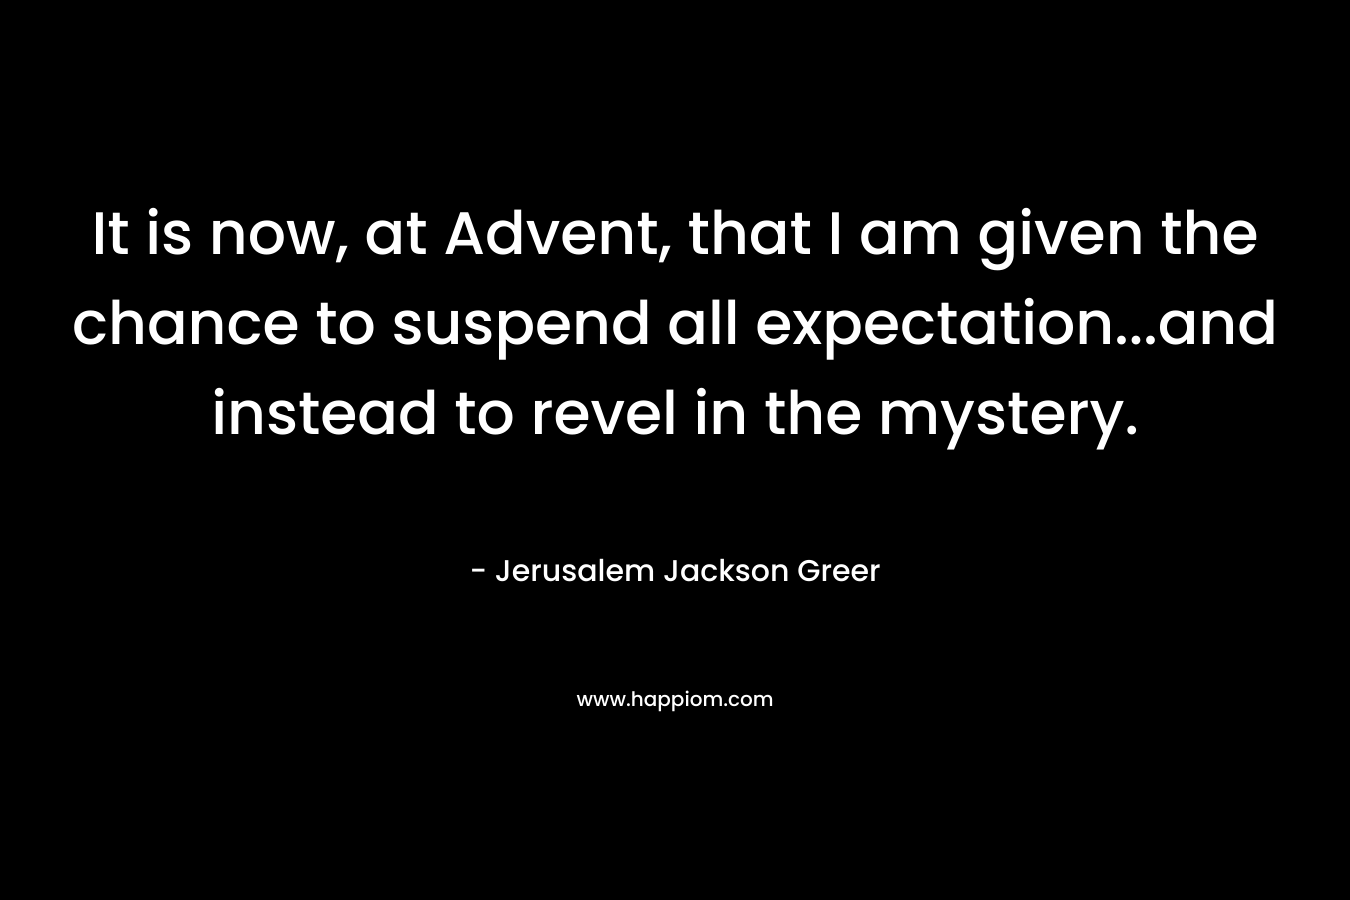 It is now, at Advent, that I am given the chance to suspend all expectation…and instead to revel in the mystery. – Jerusalem Jackson Greer